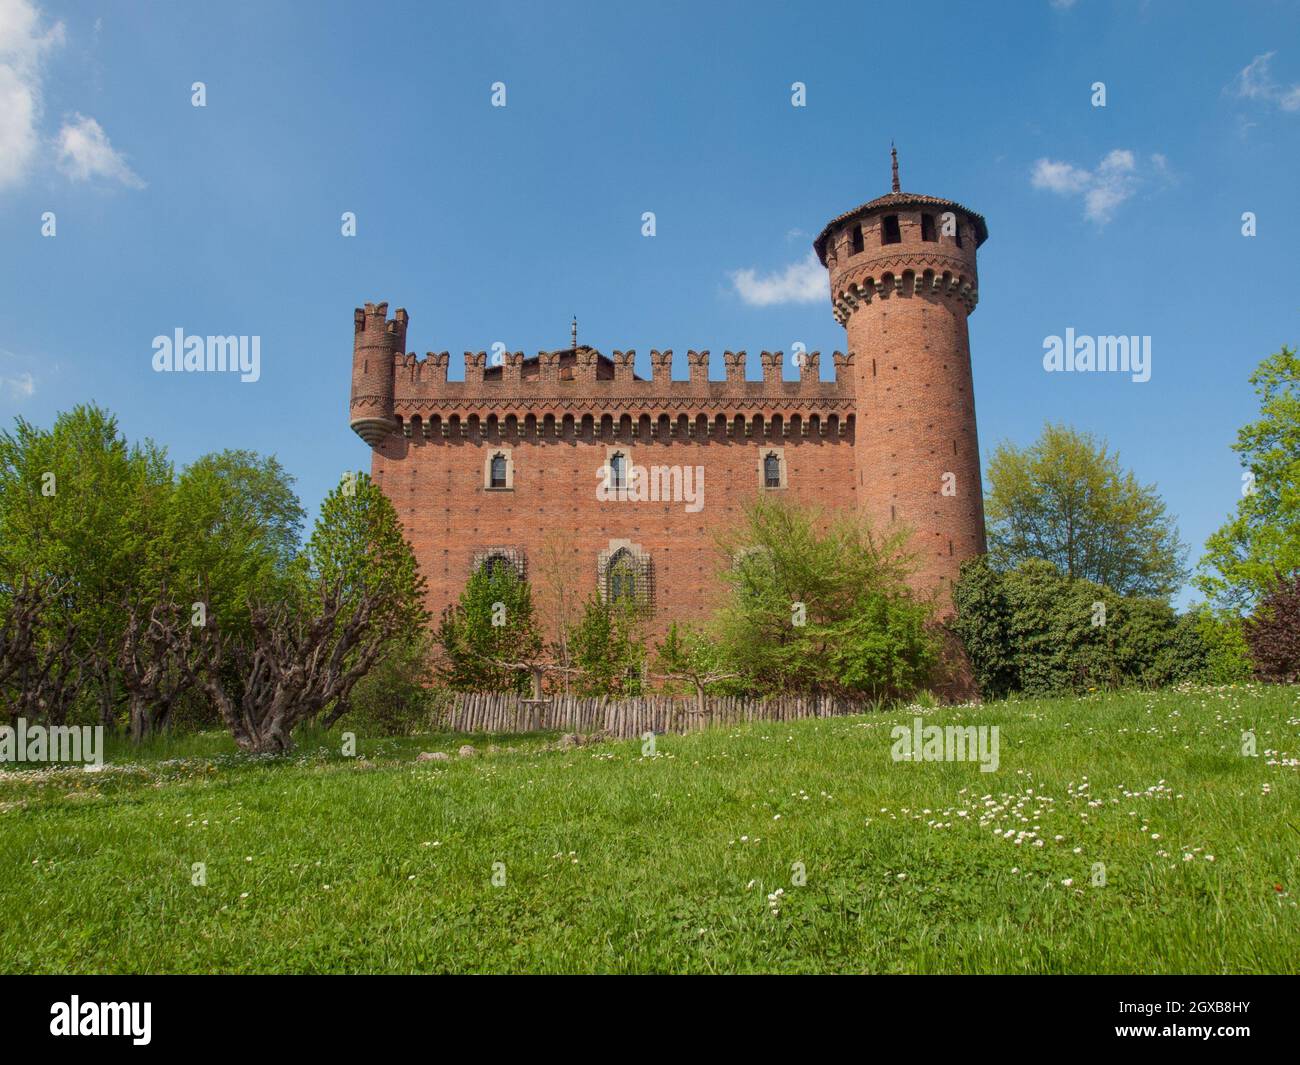 The Medieval Castle in Parco del Valentino Turin Italy. Stock Photo